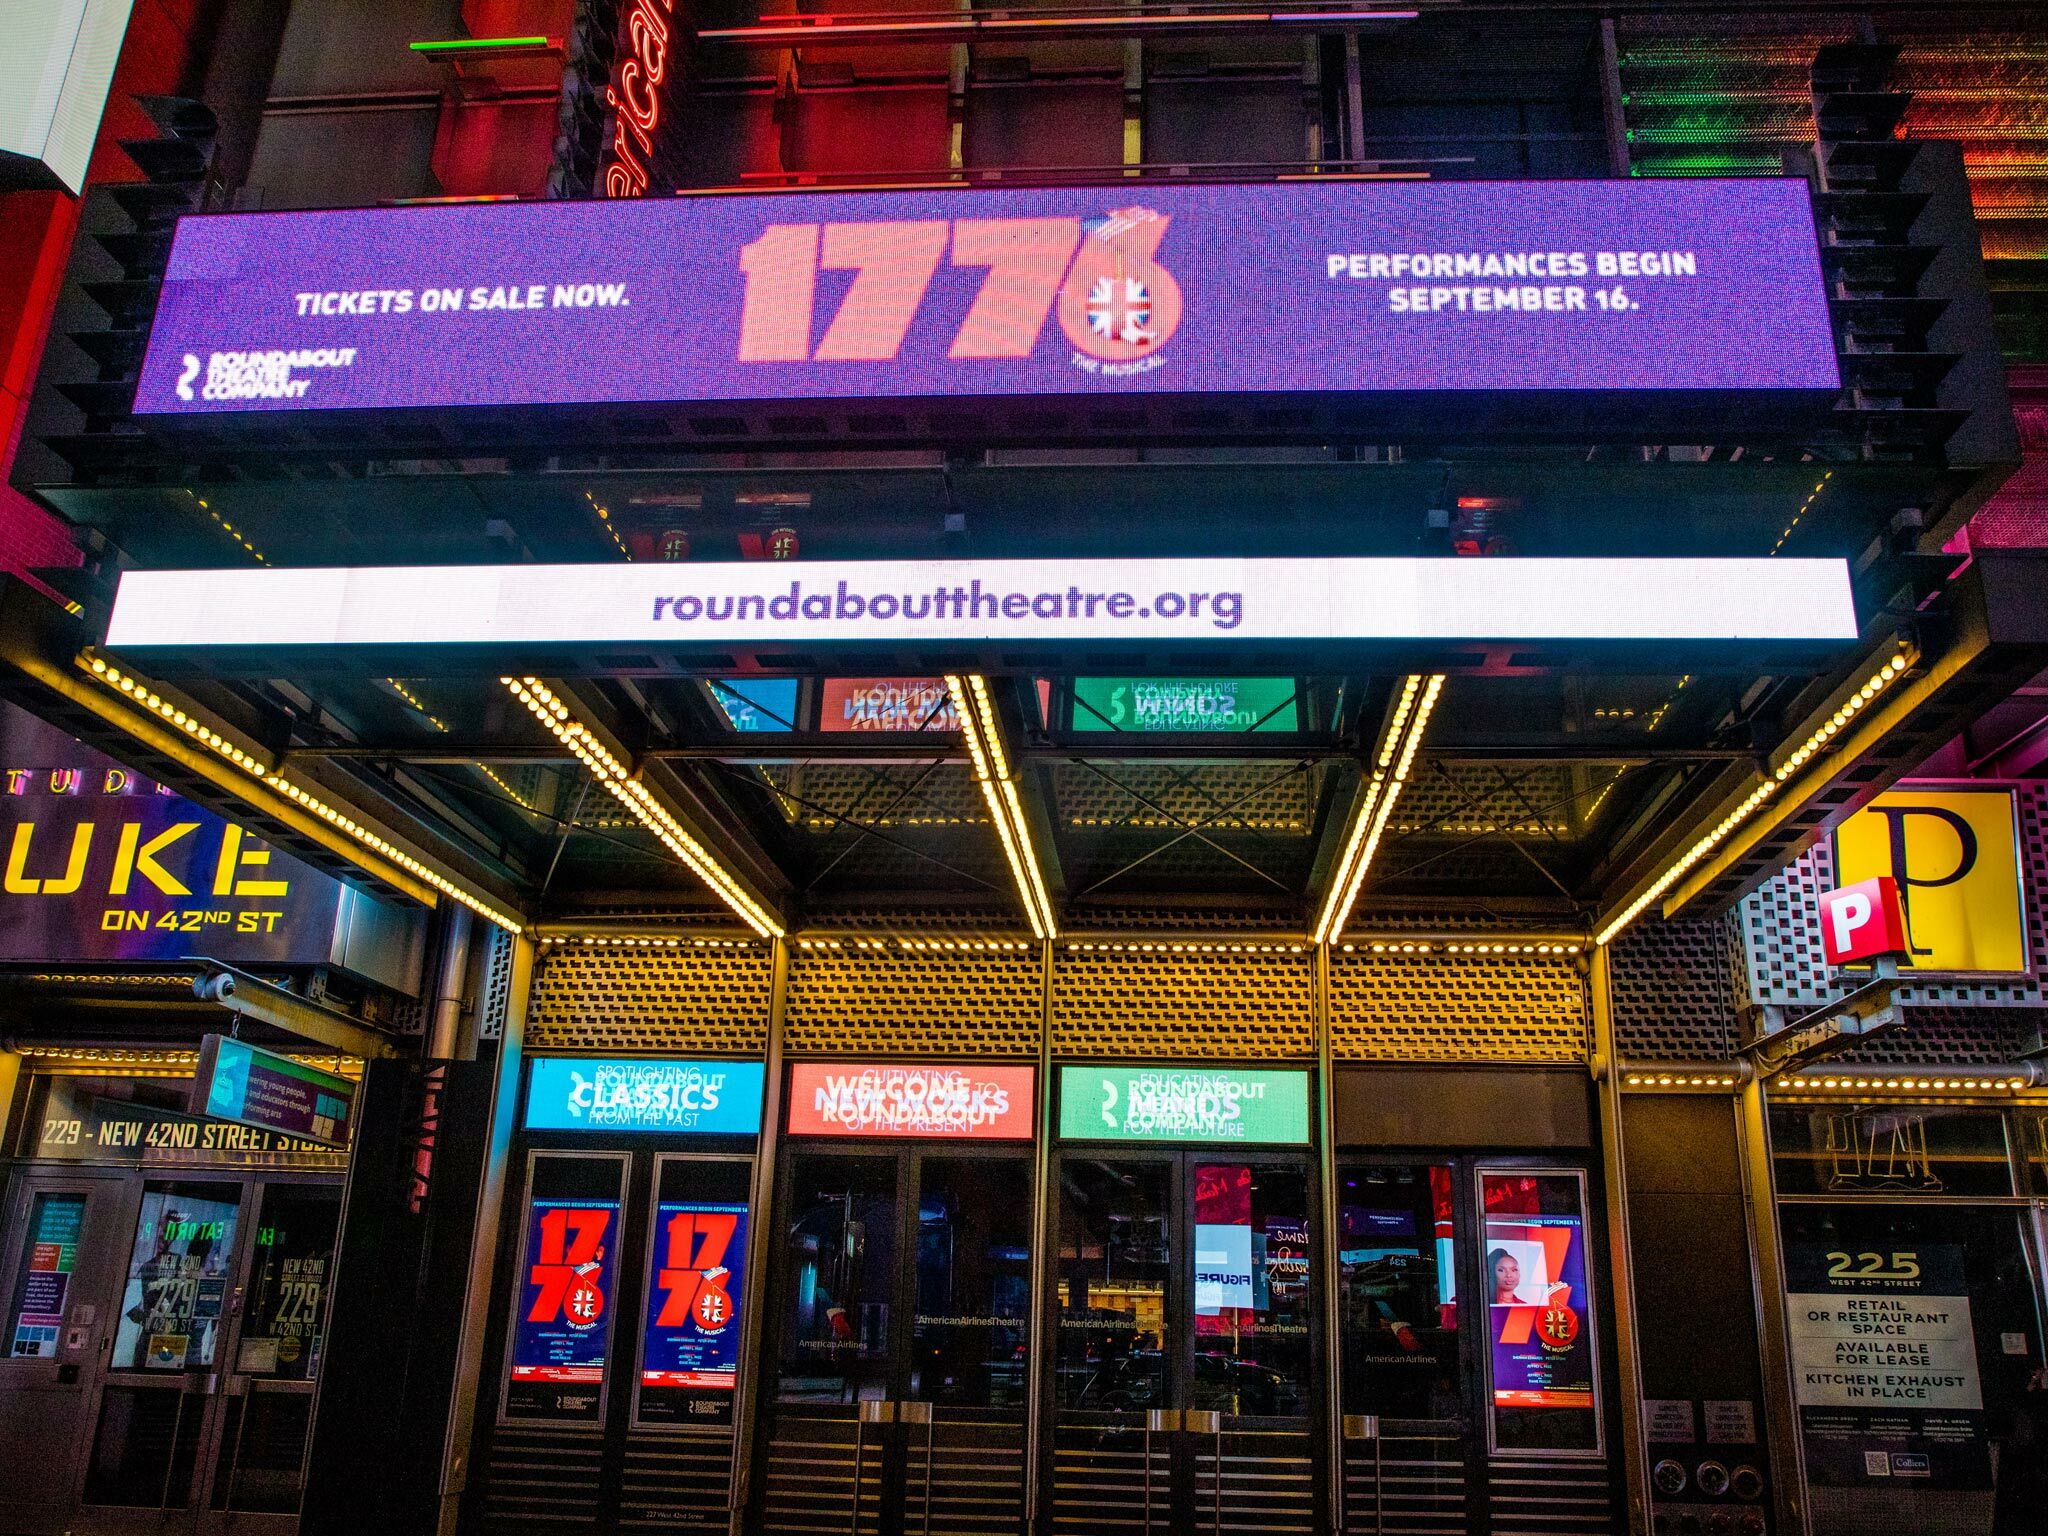 1776 Broadway Marquee at the American Airlines Theatre in NYC